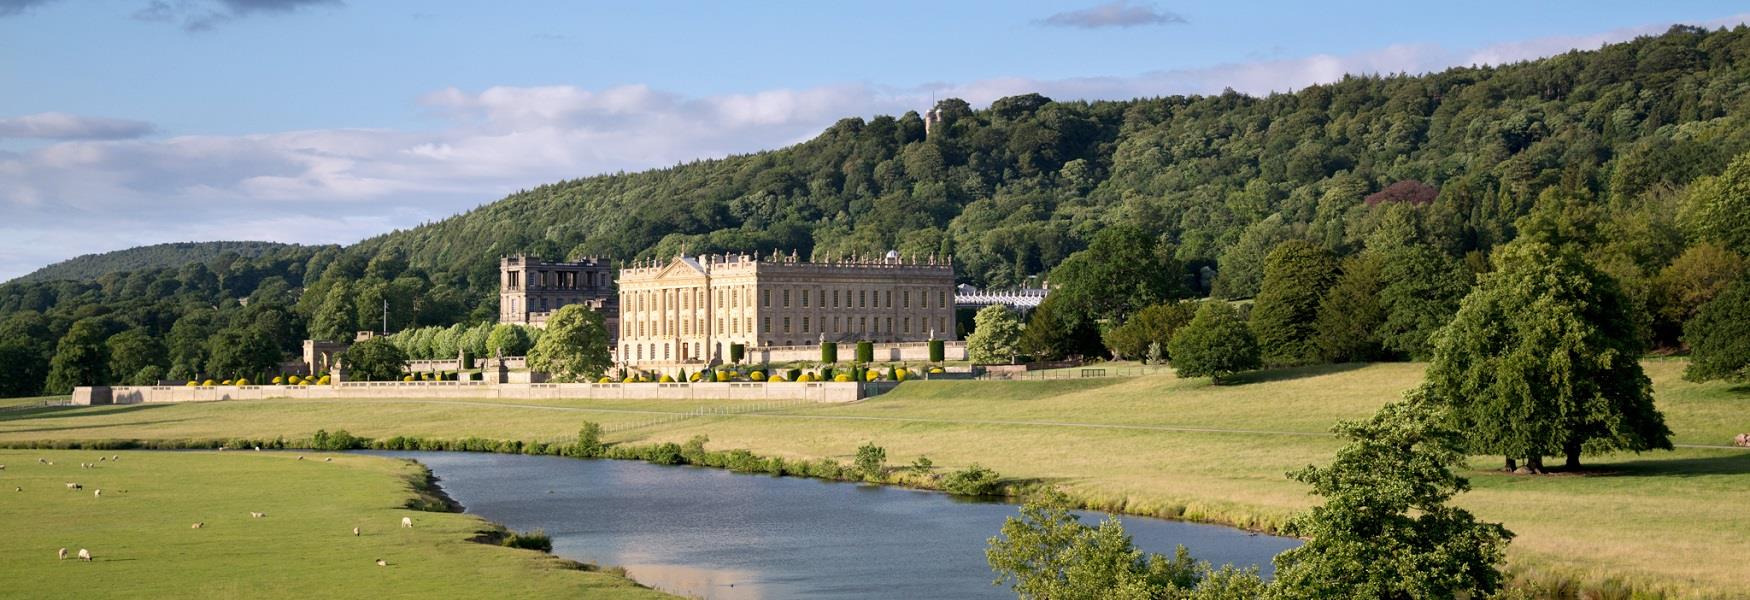 View of Chatsworth from across the river with sheep grazing